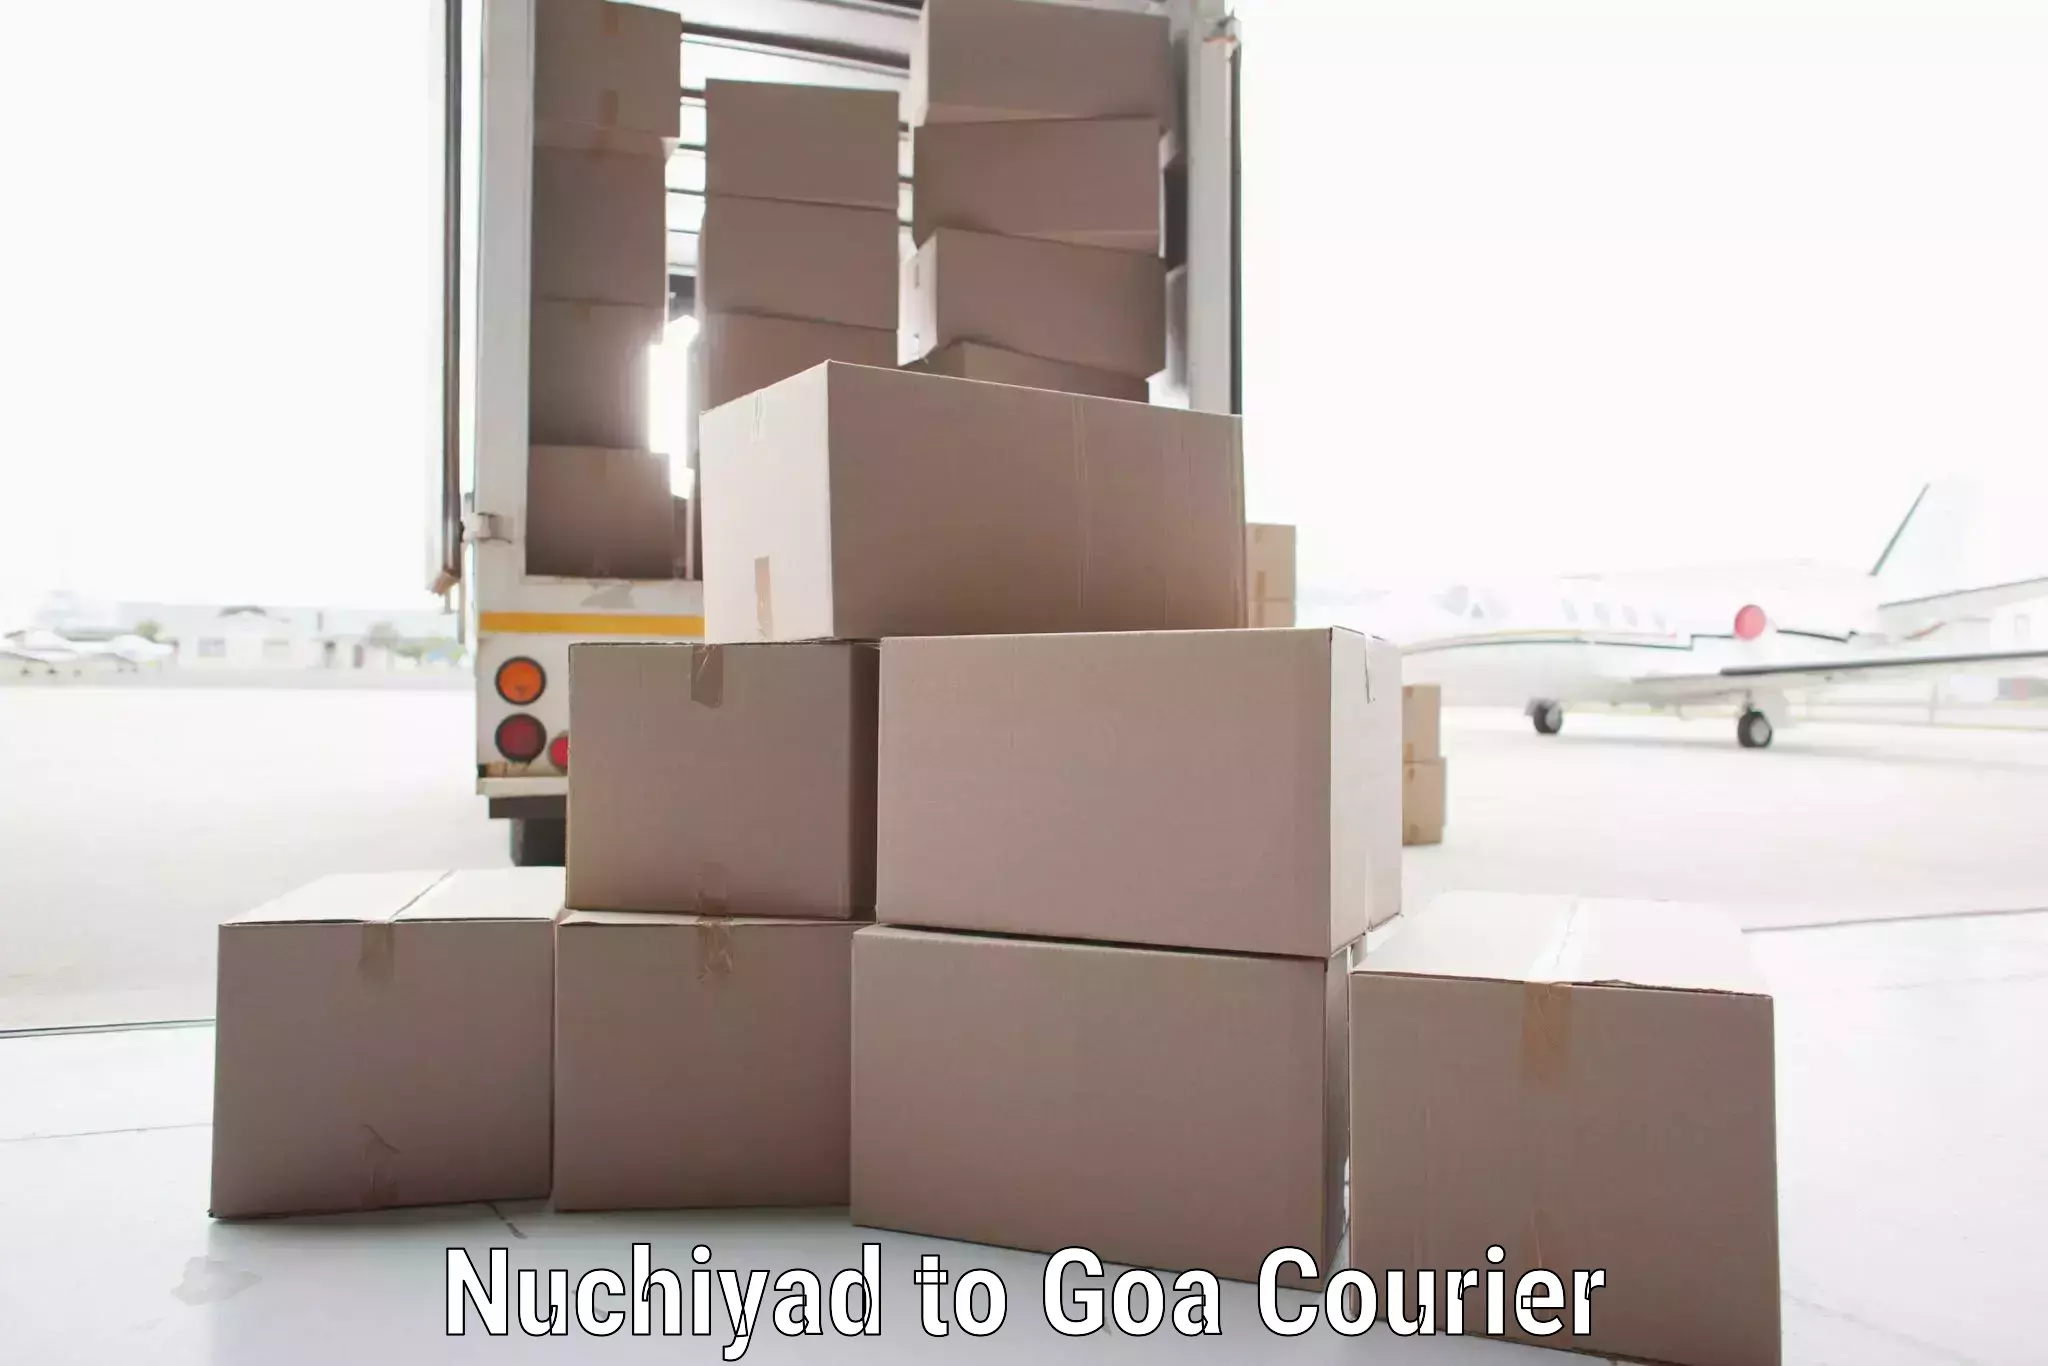 Subscription-based courier Nuchiyad to Goa